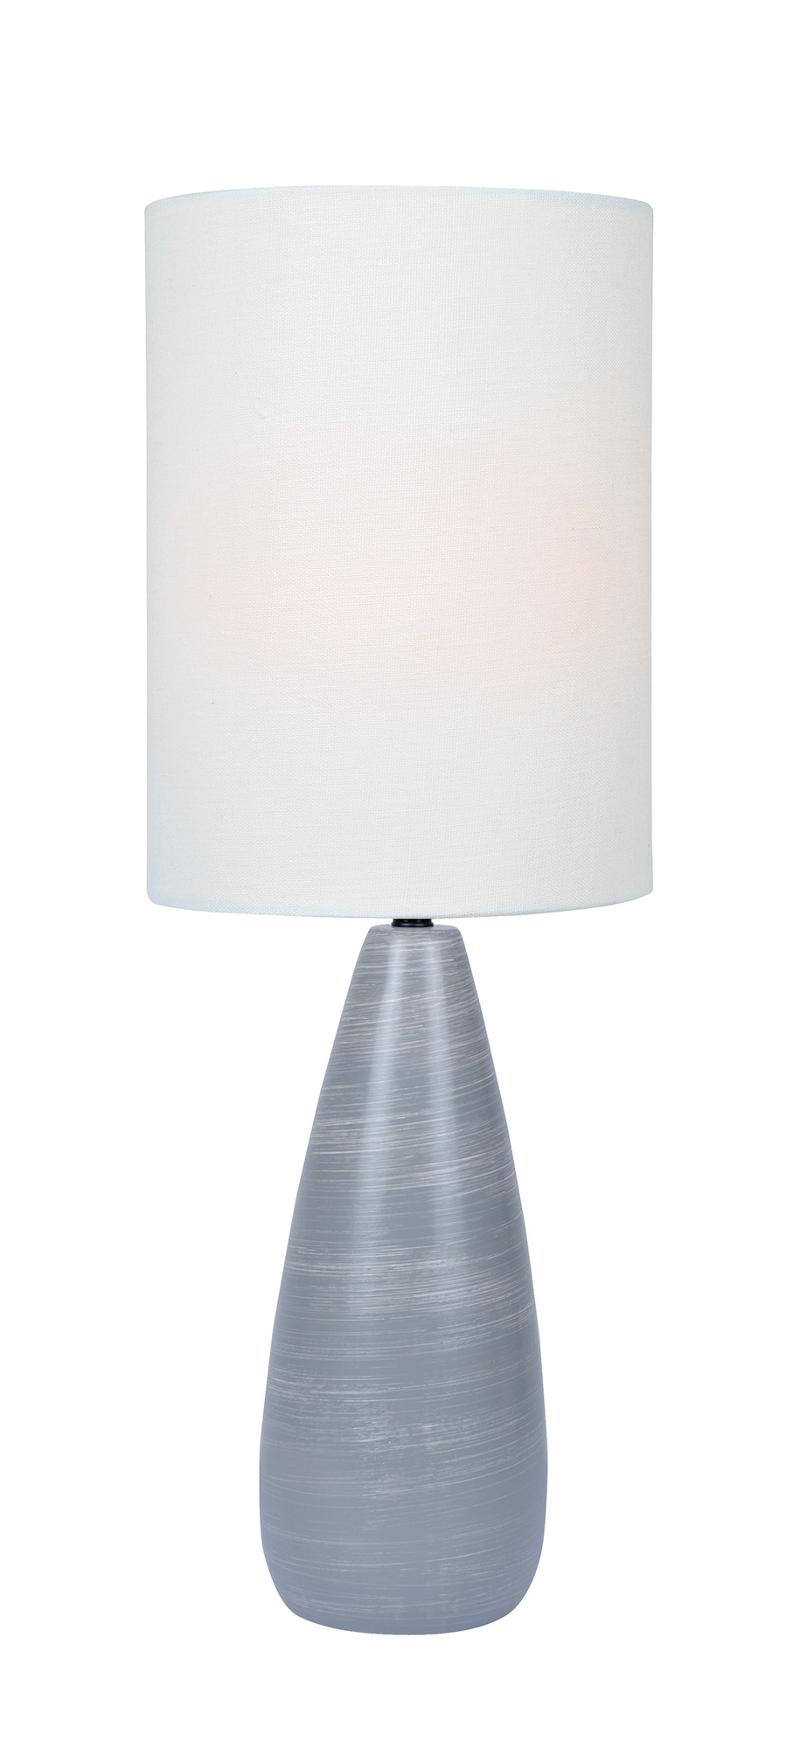 Gray Modern Table Lamp With White Shade, Small Modern Table Lamp